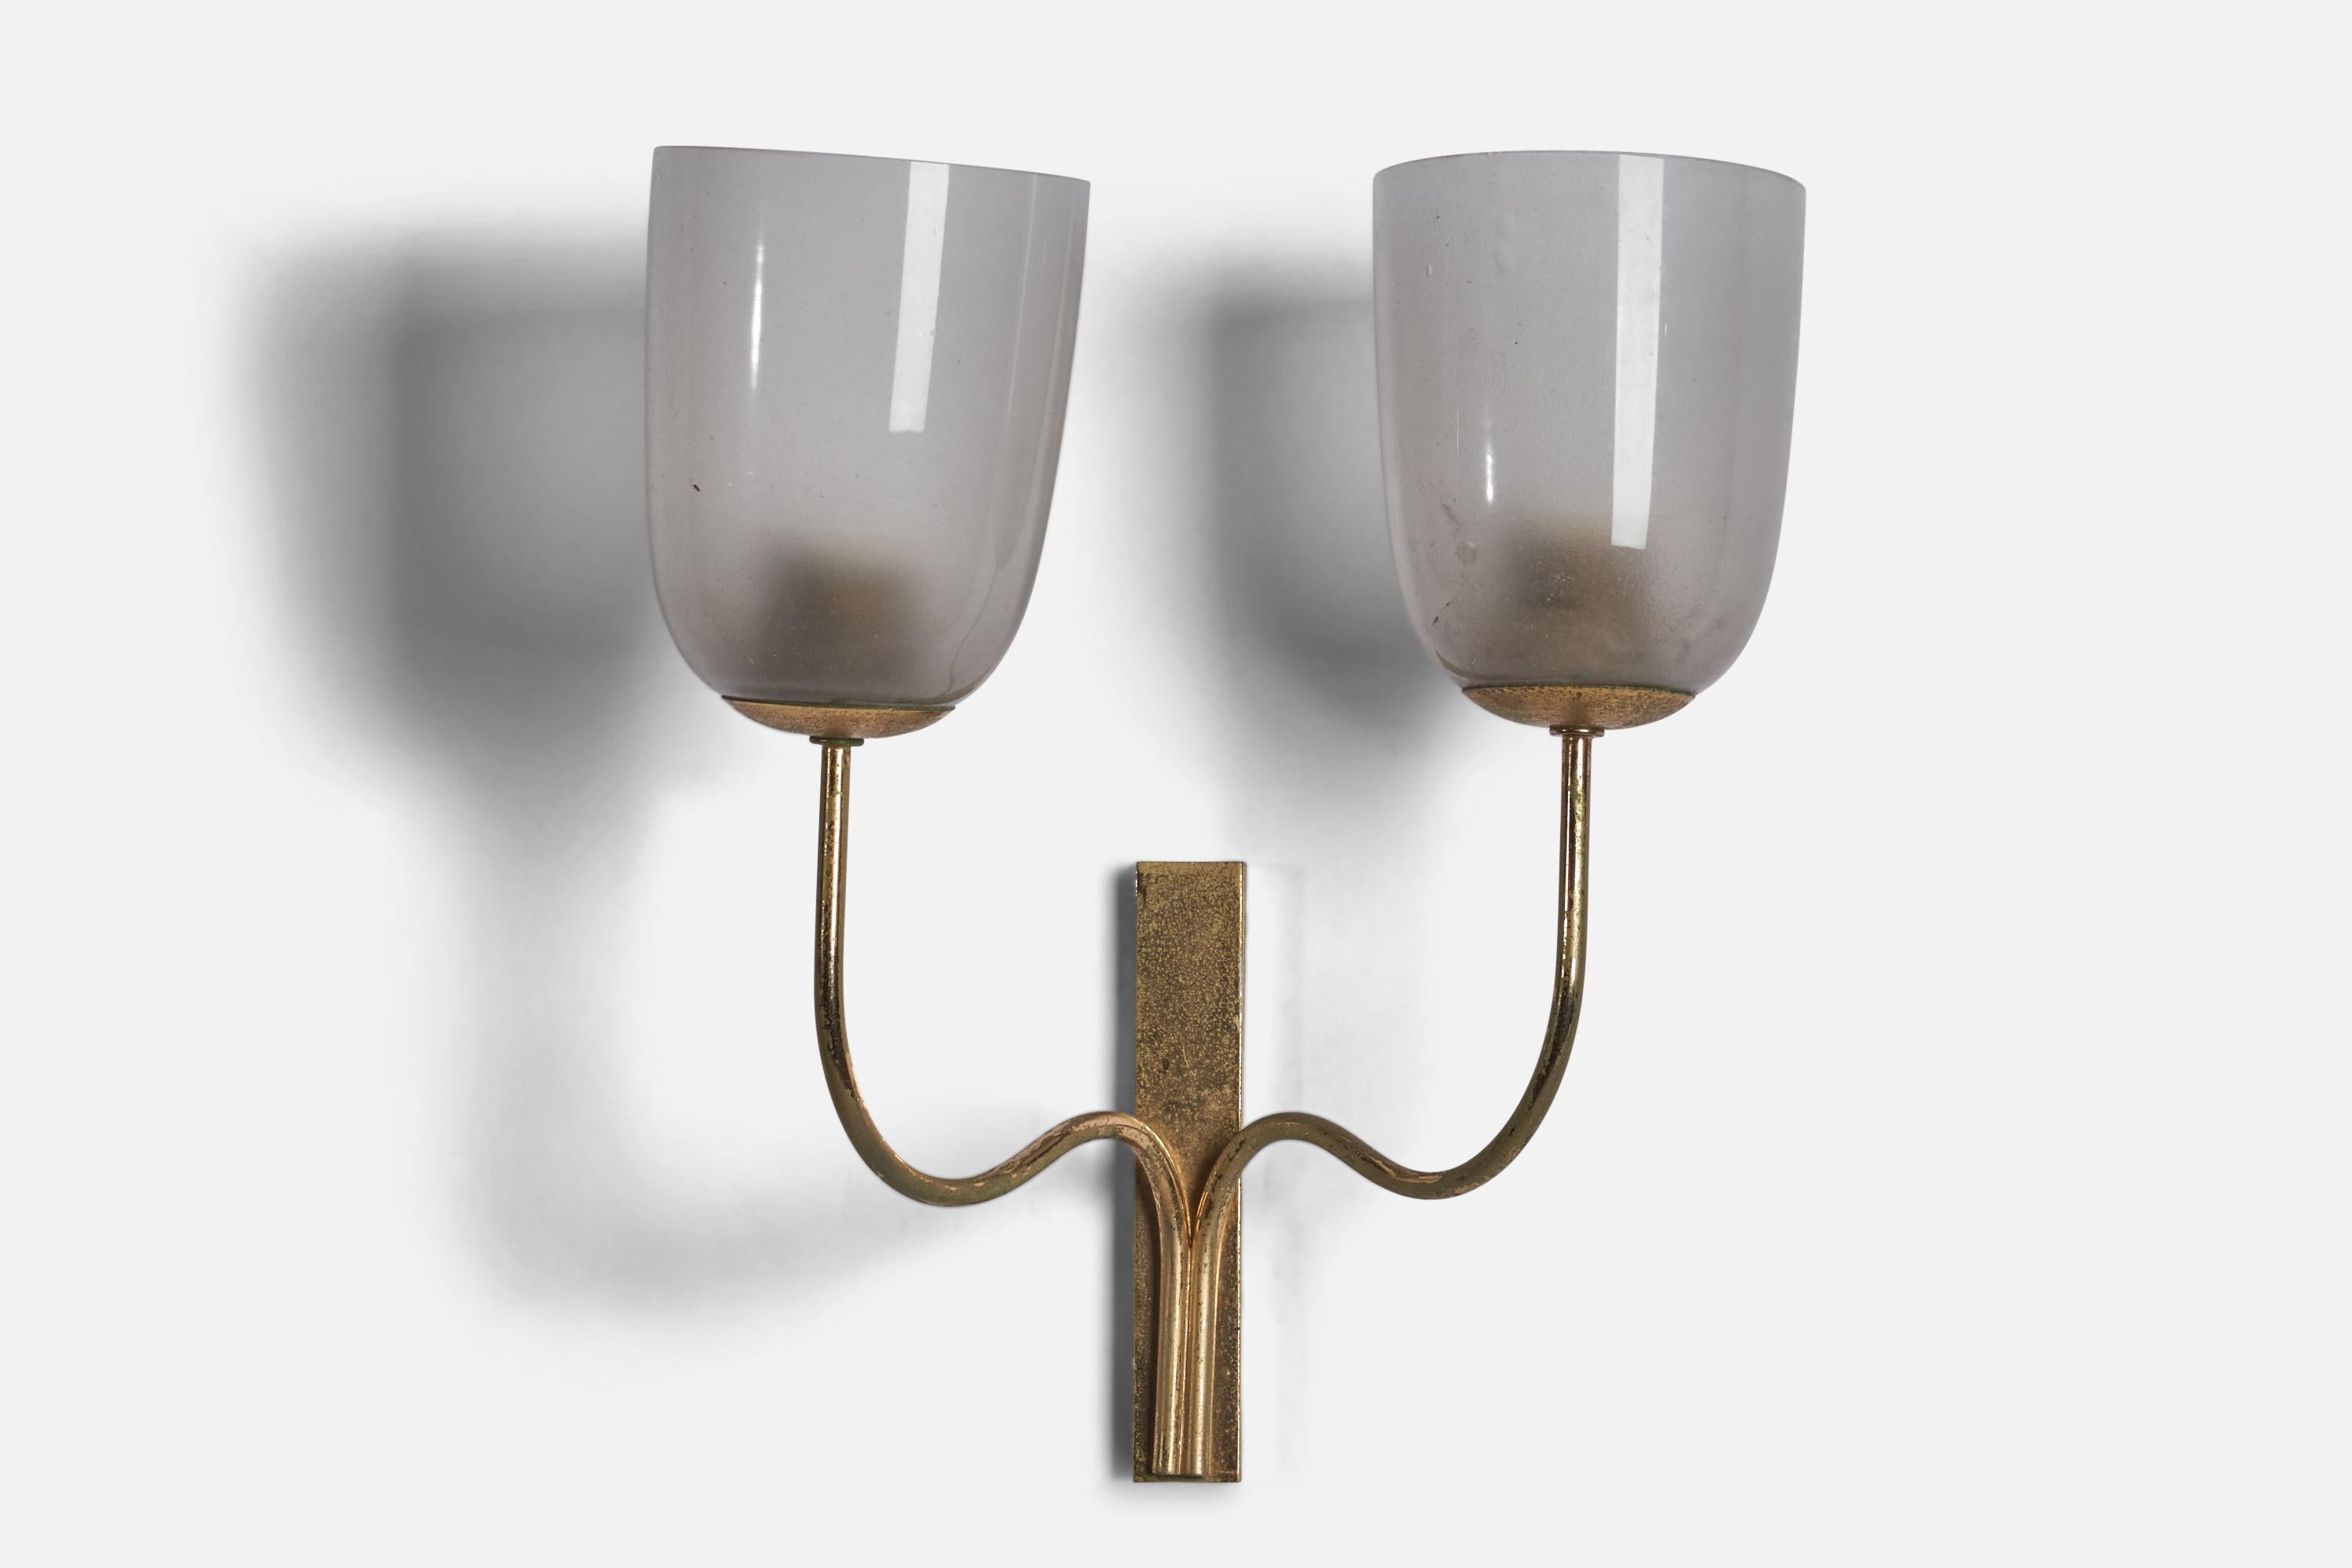 
An organic two-armed brass and milk glass wall light designed and produced in Italy, 1930s.
Overall Dimensions (inches): 14.5”:H x 12” W x 6.65” D
Back Plate Dimensions (inches): 6.75 H, 1.15 W, 0.6 D
Bulb Specifications: E-26 Bulb
Number of